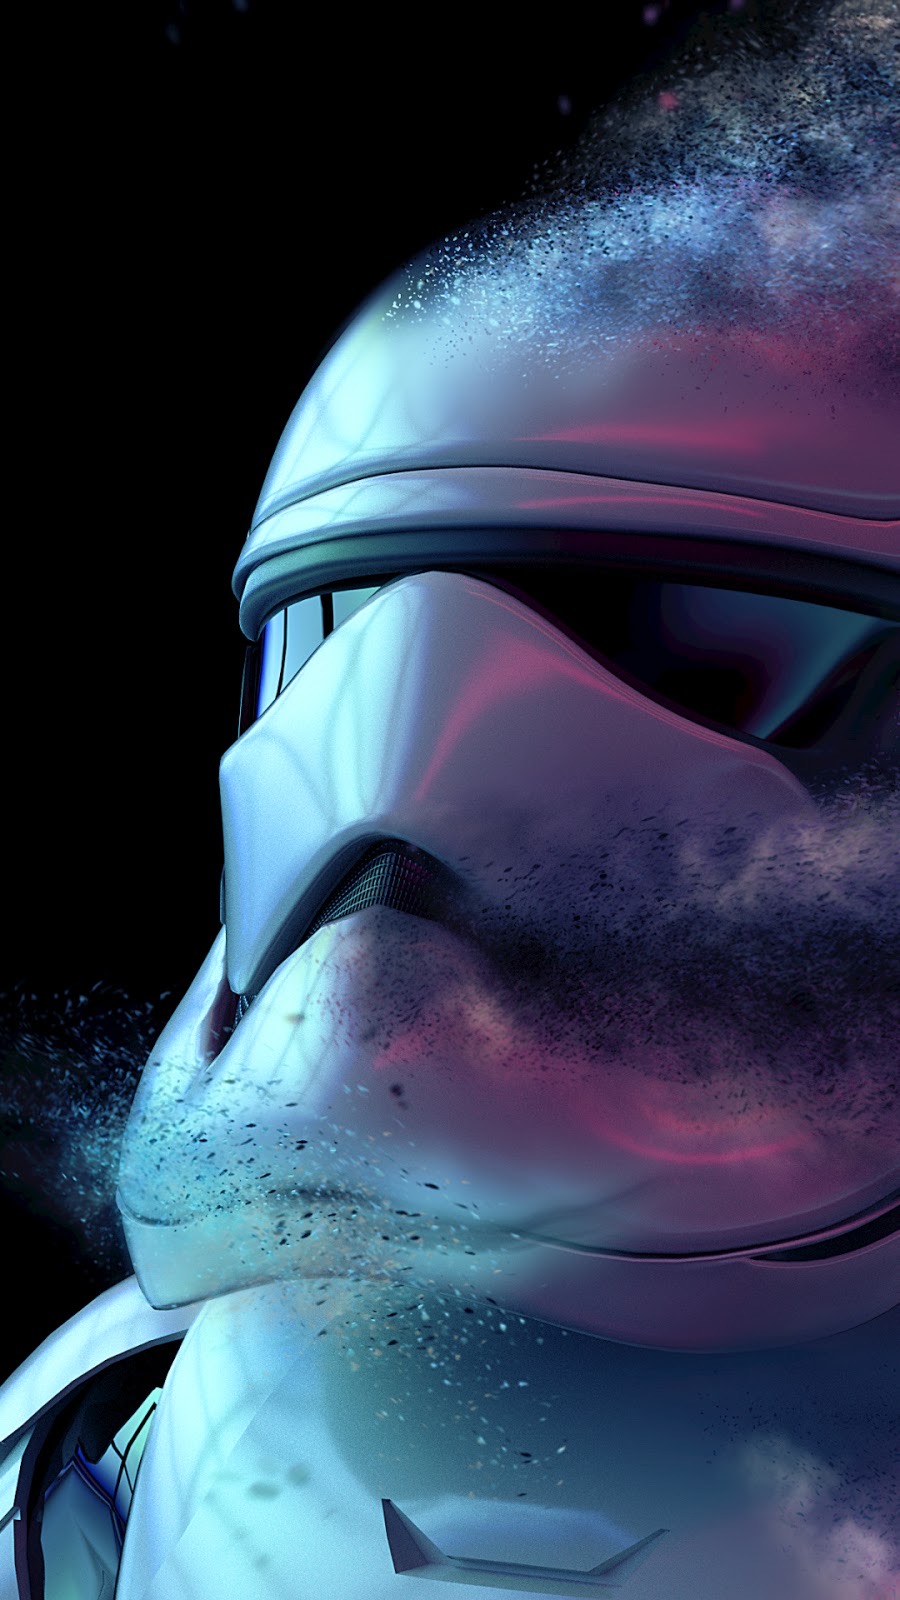 Star Wars Wallpaper for iPhone and Android